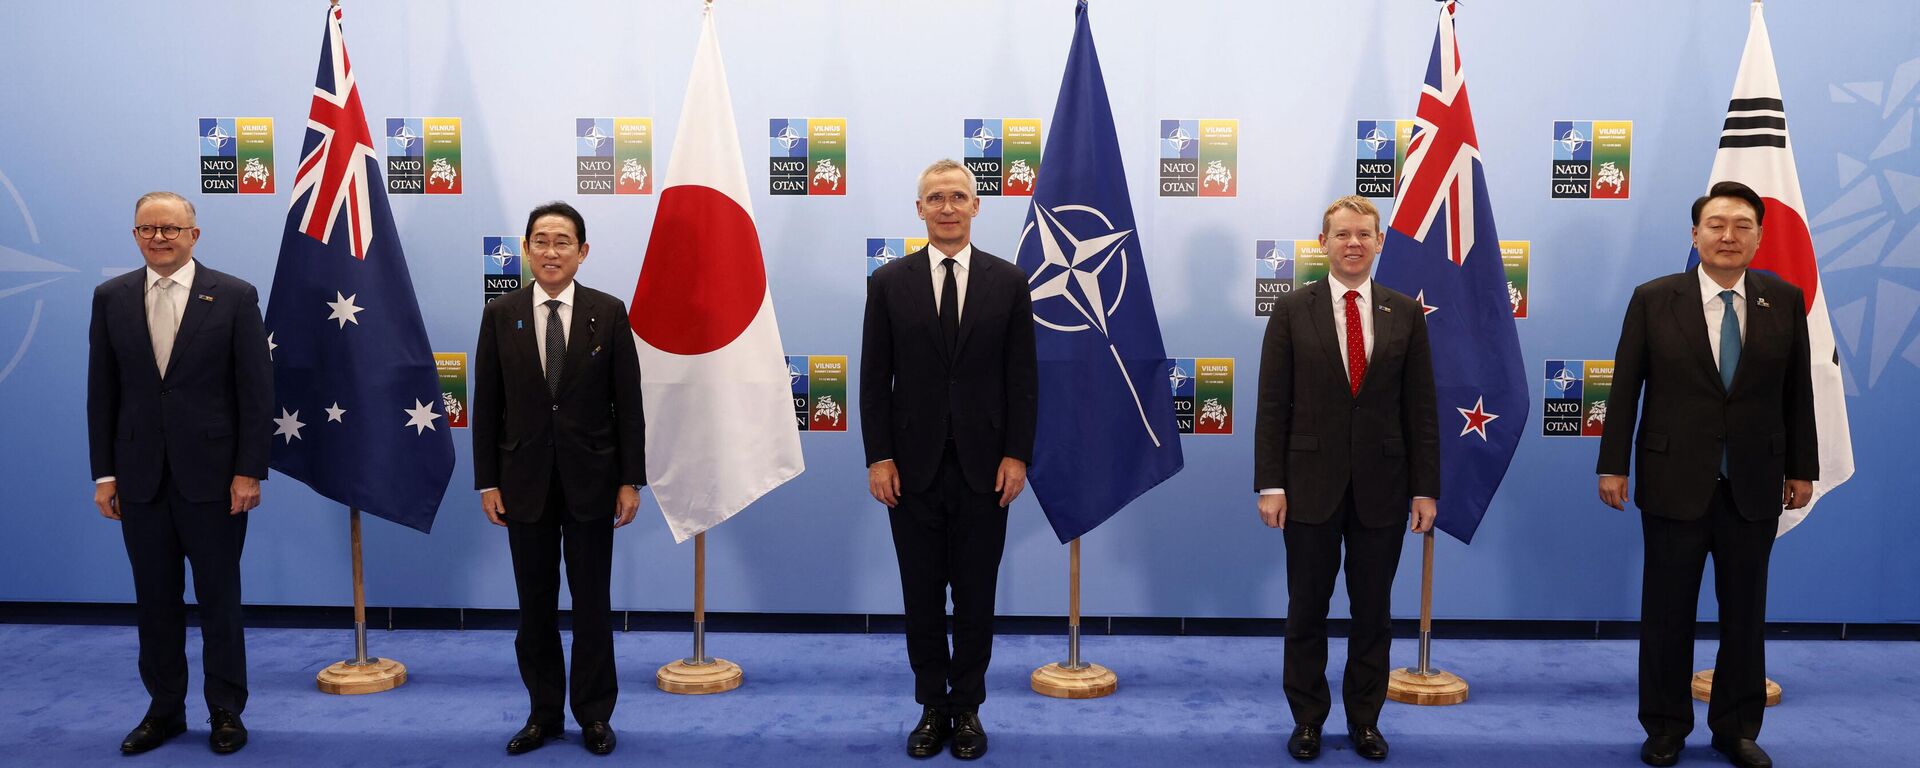 (L-R) Australia's Prime Minister Anthony Albanese, Japan's Prime Minister Fumio Kishida, NATO Secretary General Jens Stoltenberg, New Zealand's Prime Minister Chris Hipkins and South Korea's President Yoon Suk-yeol pose for a family photo prior to a meeting of the North Atlantic Council (NAC) with Asia Pacific partners during the NATO Summit in Vilnius, Lithuania, on July 12, 2023.  - Sputnik International, 1920, 14.12.2023